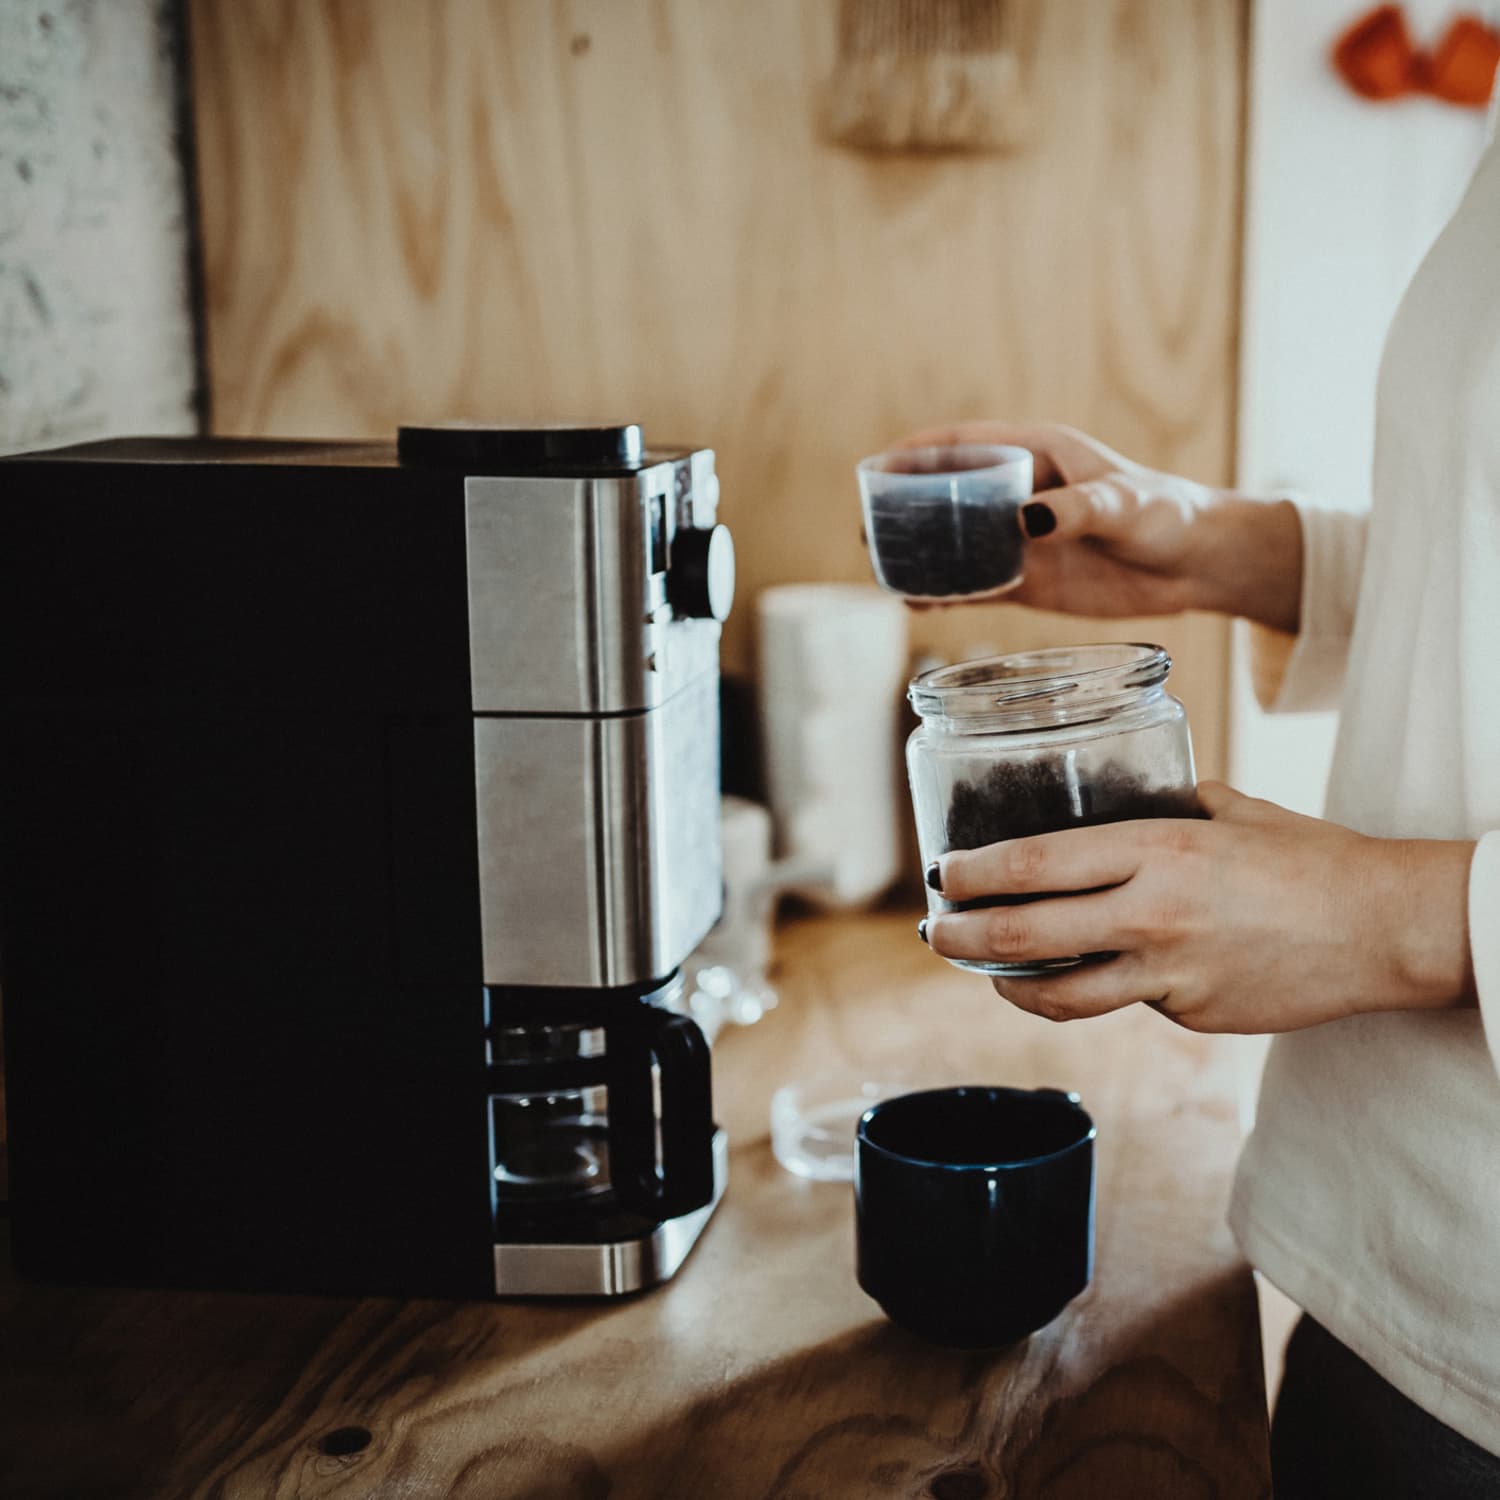 The Game-Changing Tasting Glasses That Make Me Appreciate Coffee